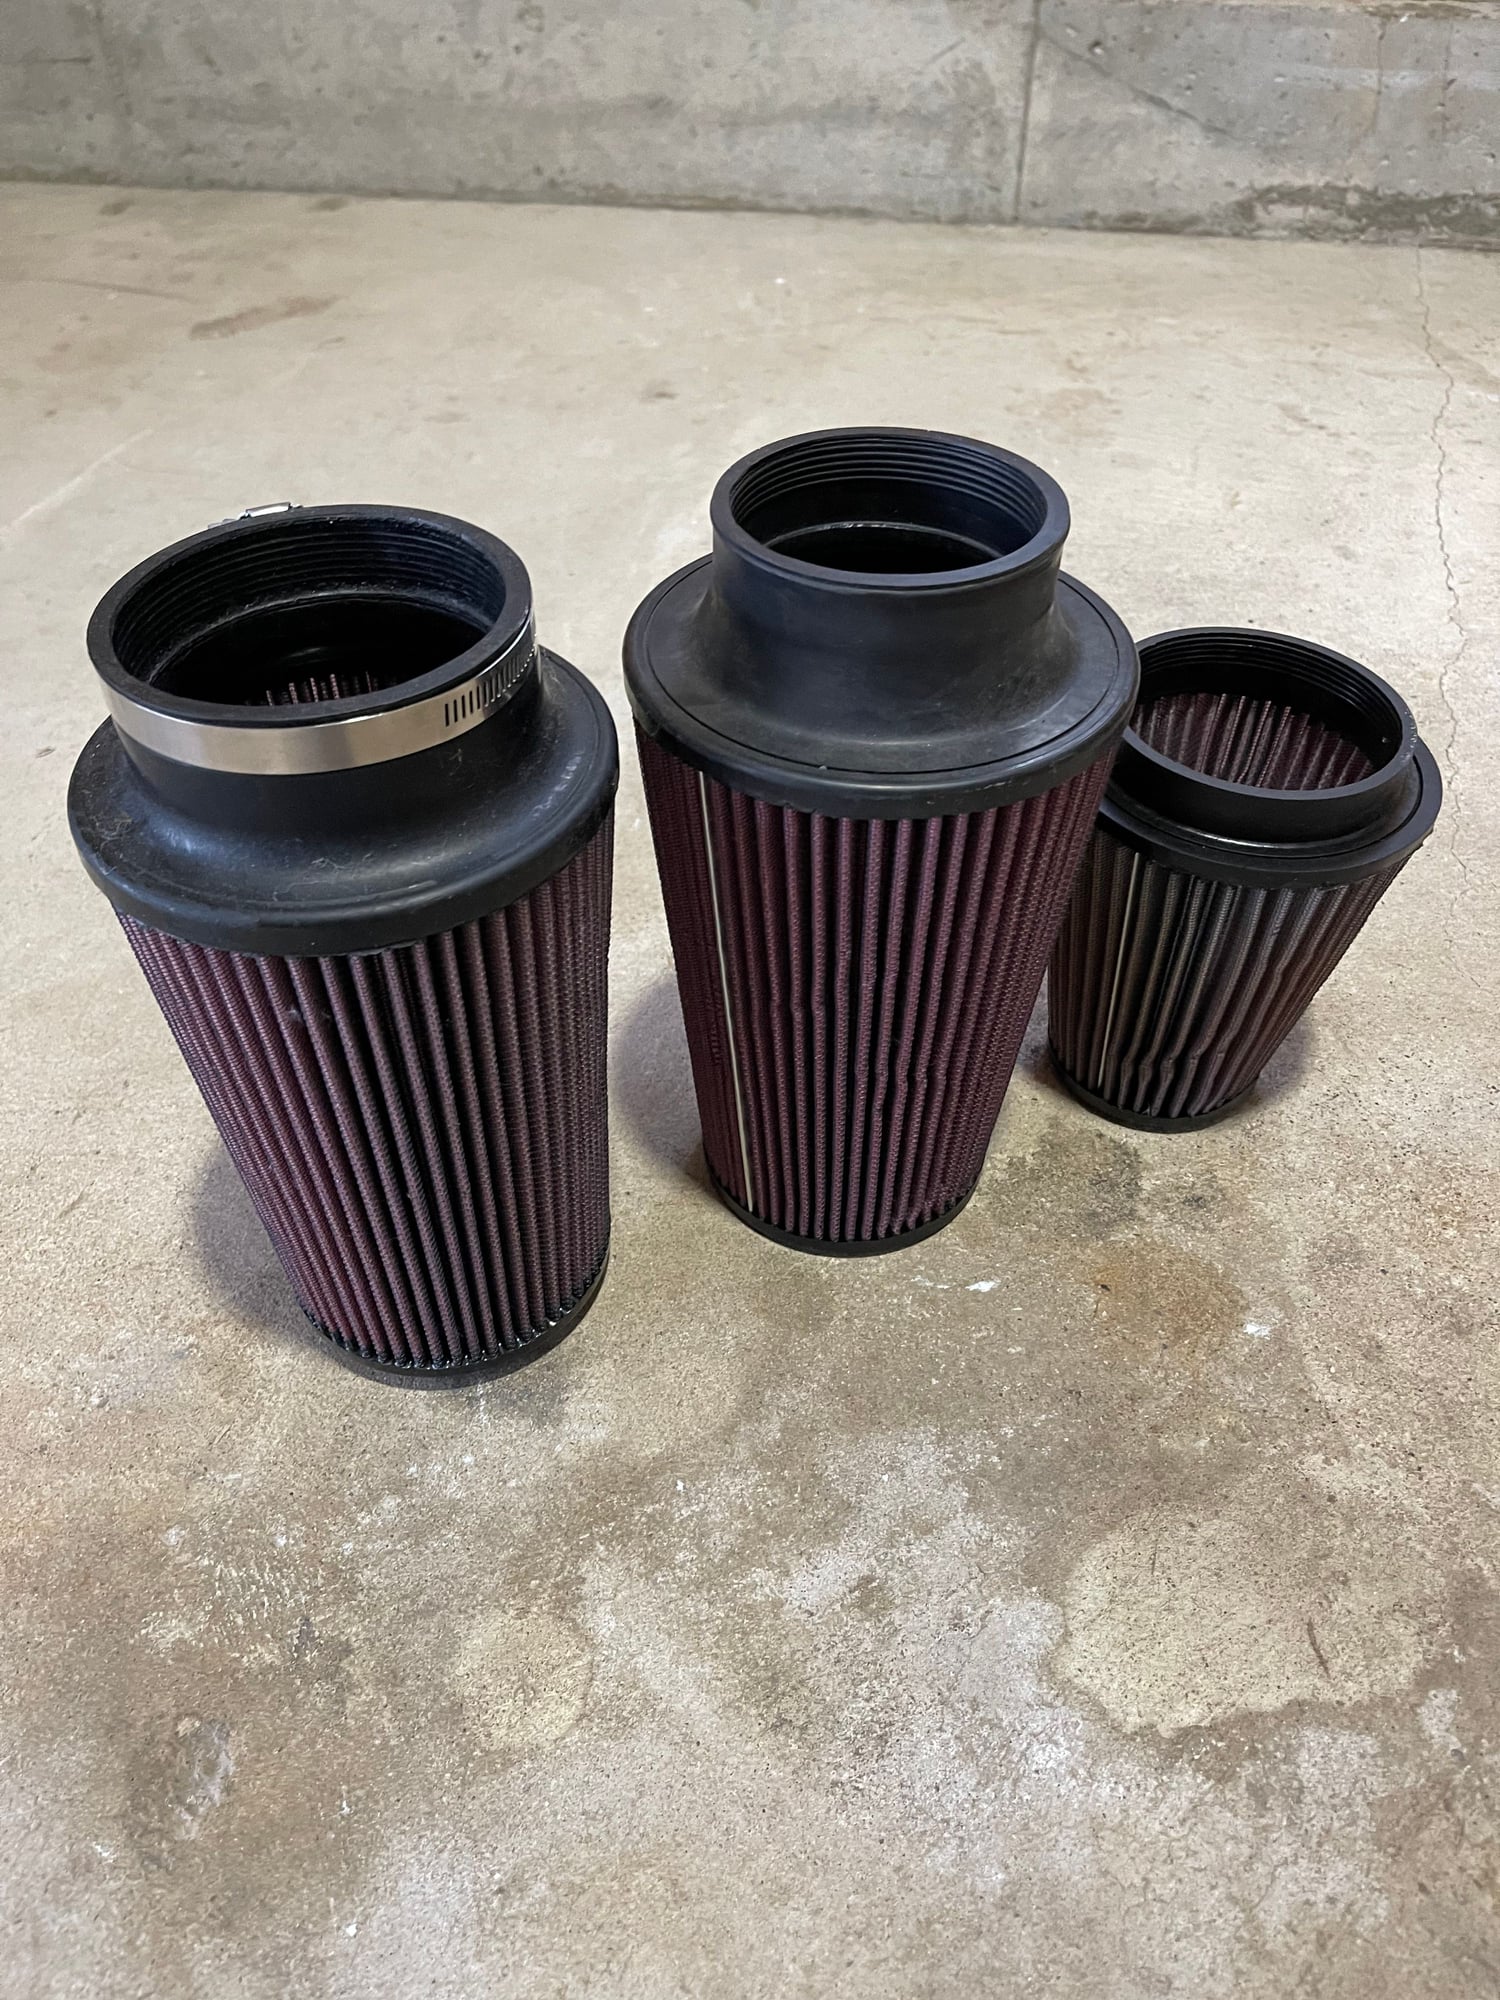 Engine - Intake/Fuel - (3) 4 Inch Air Filters K&N - New - 0  All Models - Lowell, MI 49331, United States